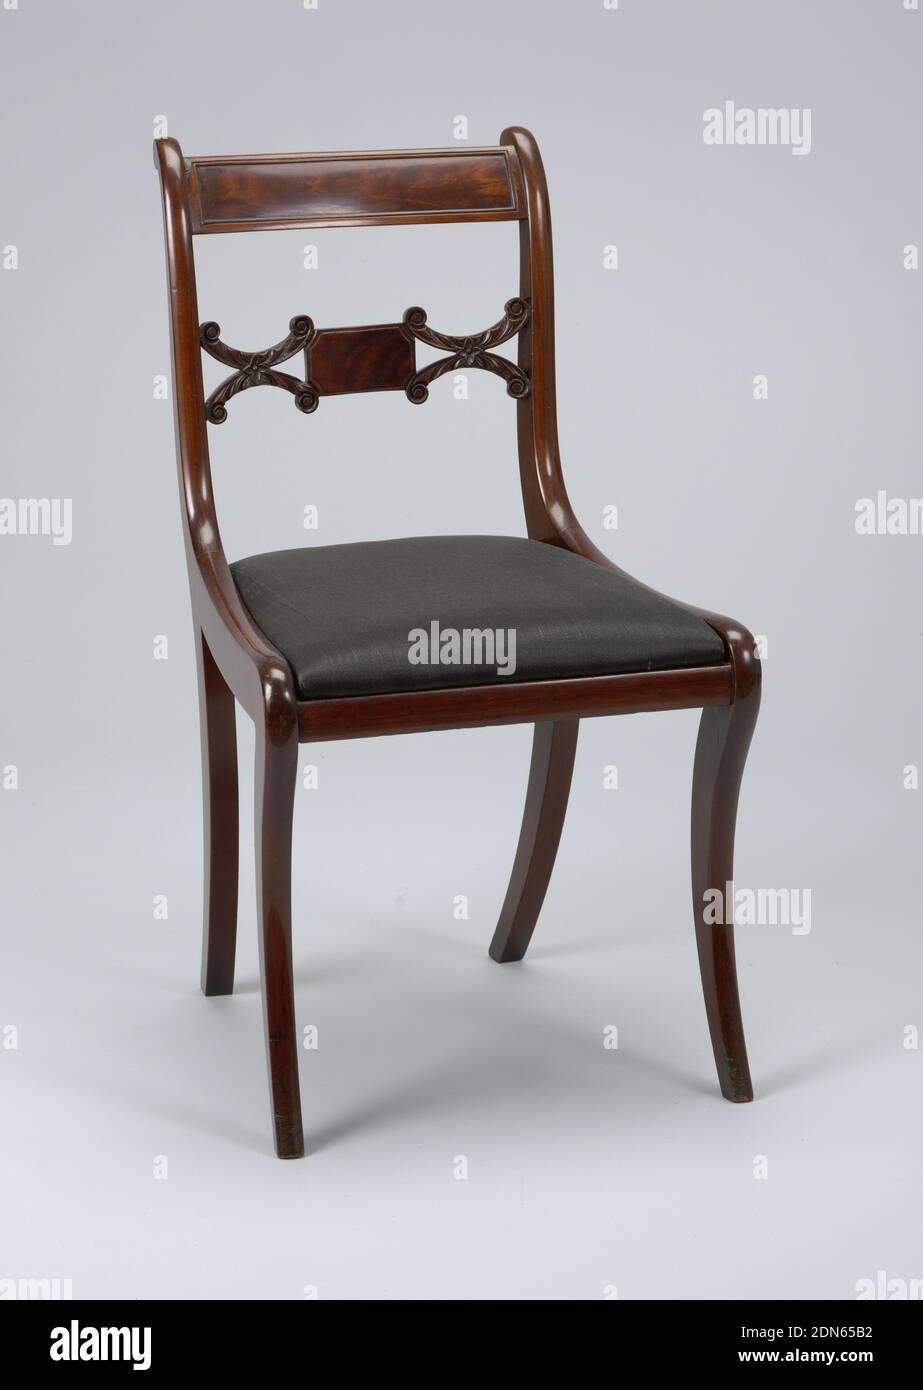 Side Chair, wood (mahogany), wood (poplar), horse hair (seat), Back legs flat-sided, front legs flat excepting rounded front face; legs curve outward towar bottom, and back legs incline toward each other at bottom. Corner posts of back terminate in a double curve with elementary volute form. Flat top rail bowed toward back, slightly arched, with a rectangular panel of inset veneer surrounded by beading. Splat horizontal, composed of small oblong faced with veneer, flanked on either side by horizontal coupled C-scrolls deeply carved with foliage, terminating in volutes. Stock Photo